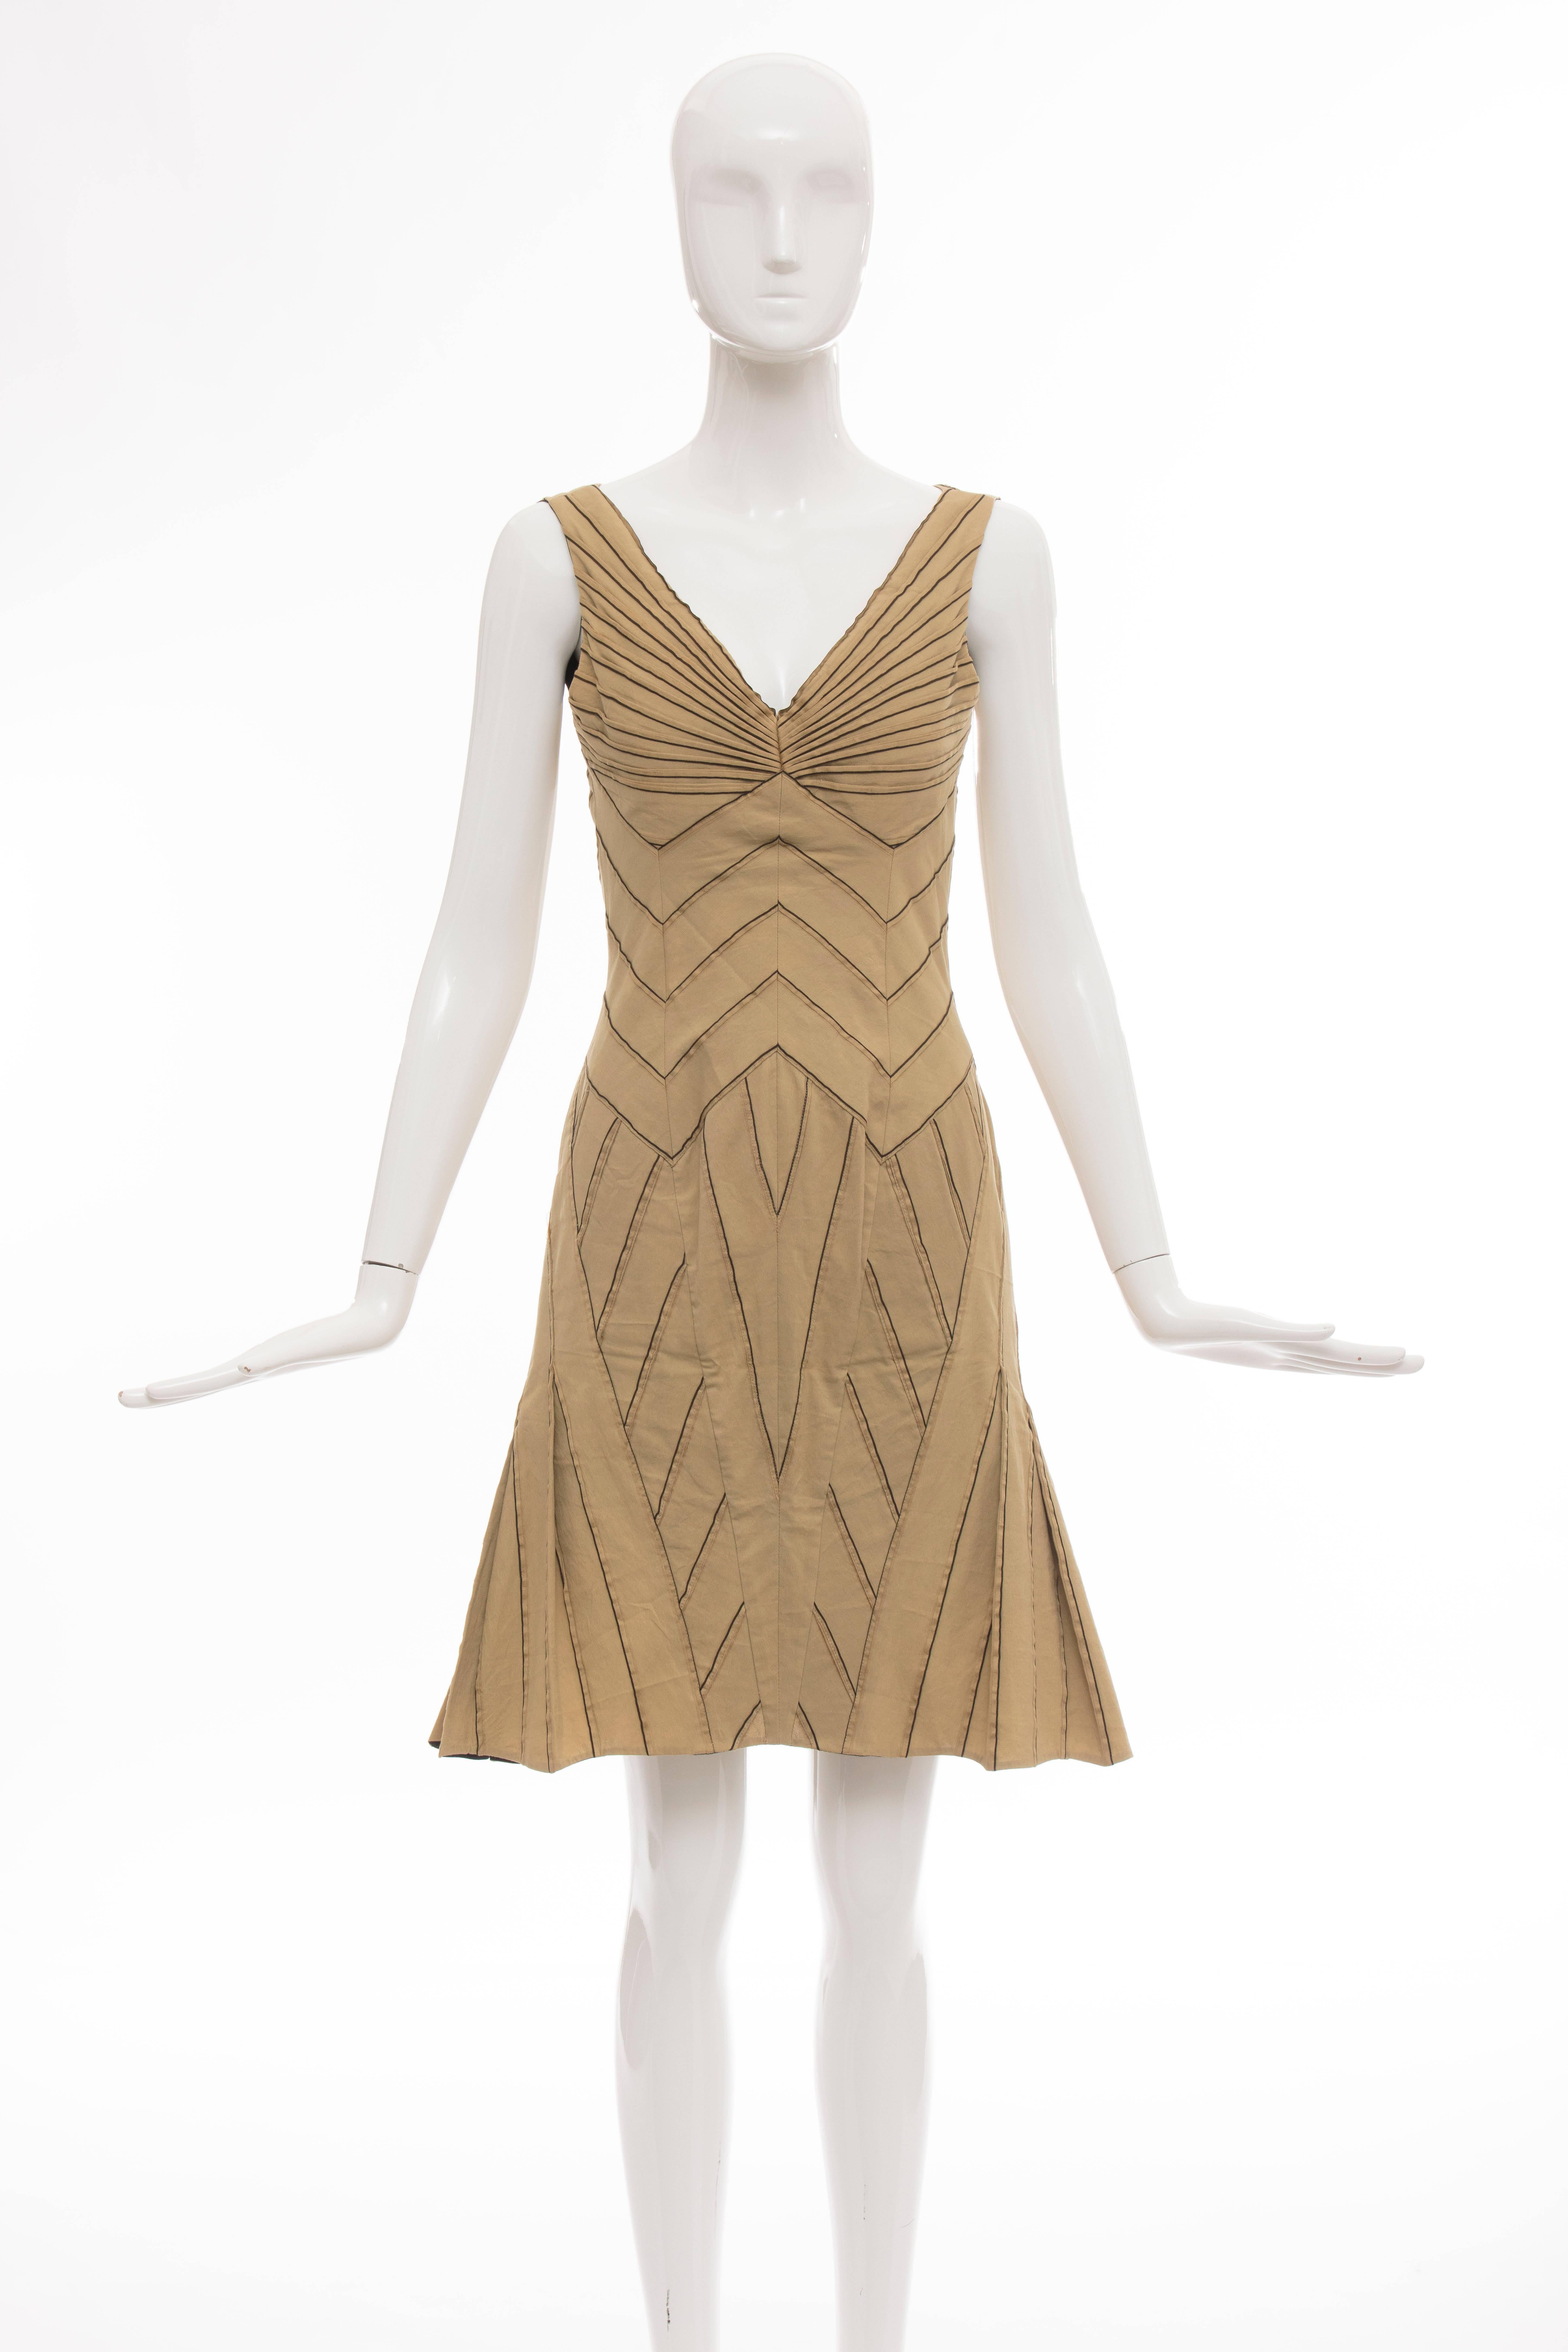 Zac Posen, Spring-Summer 2003 runway cotton silk khaki sleeveless knee-length dress with striped pattern throughout, ruffled accents at bust and concealed zip closure at back.

US. 4

Bust 31, Waist 26, Hips 31, Length 37